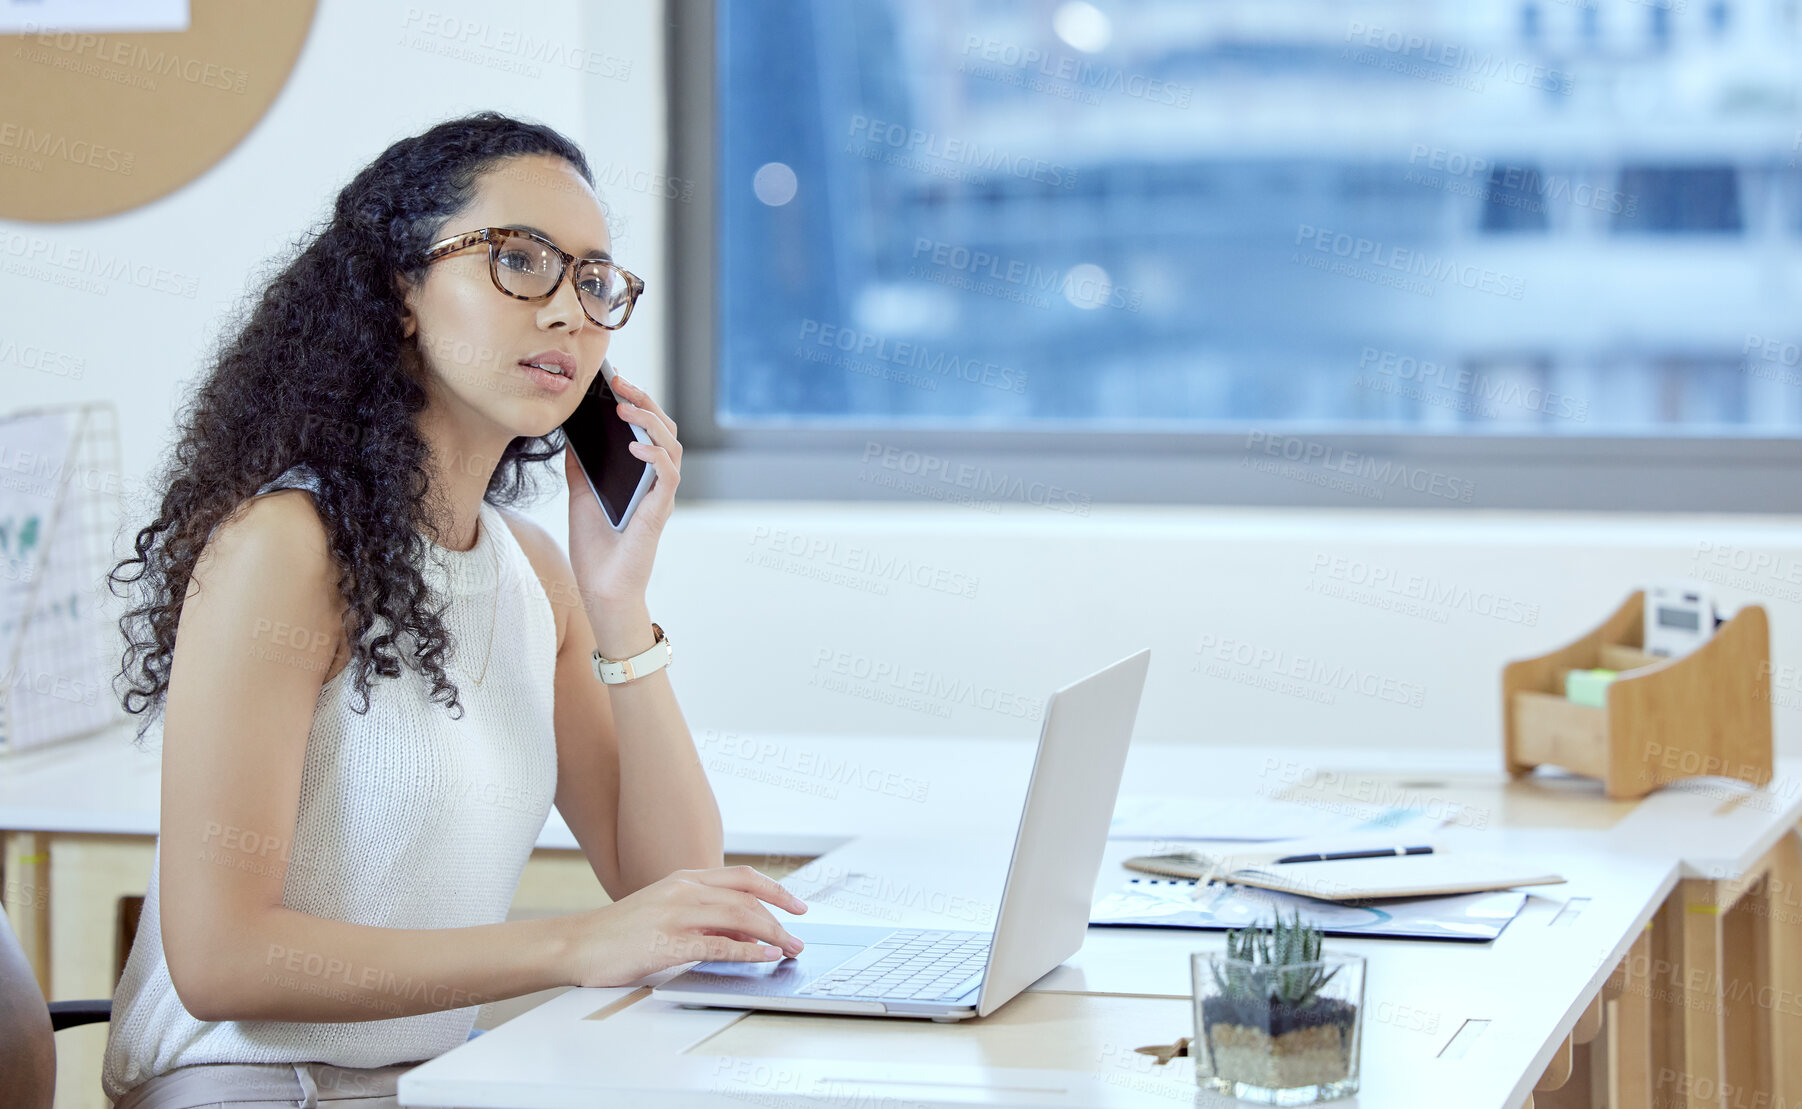 Buy stock photo Shot of a young businesswoman on a call in an office at work